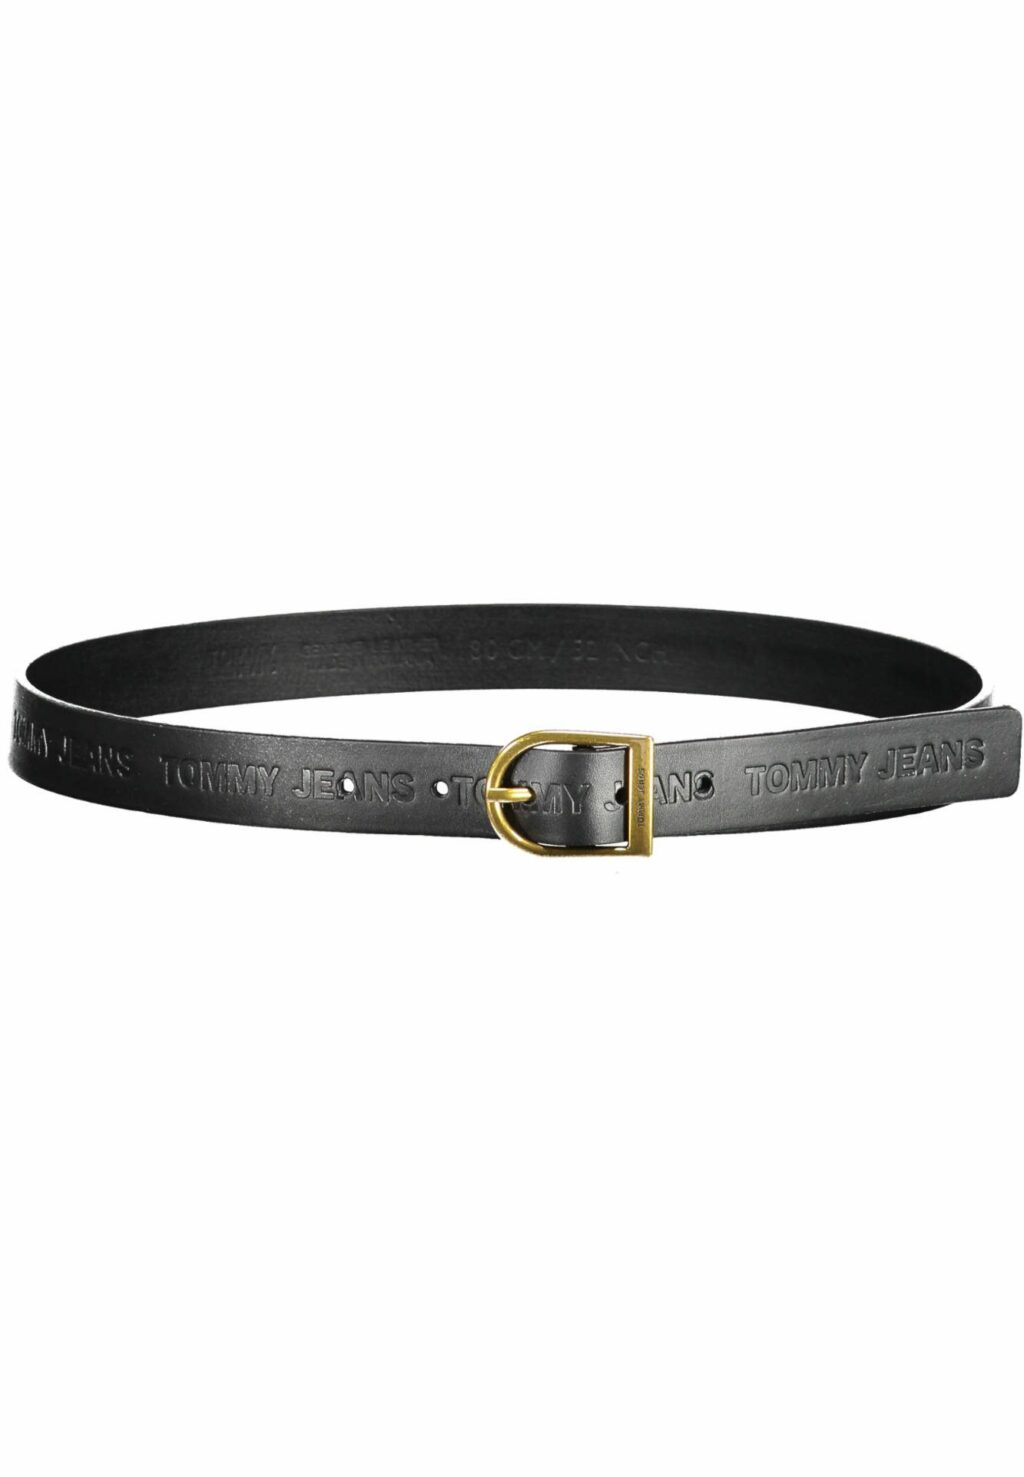 TOMMY HILFIGER BLACK WOMEN'S LEATHER BELT AW0AW10696_NERO_BDS